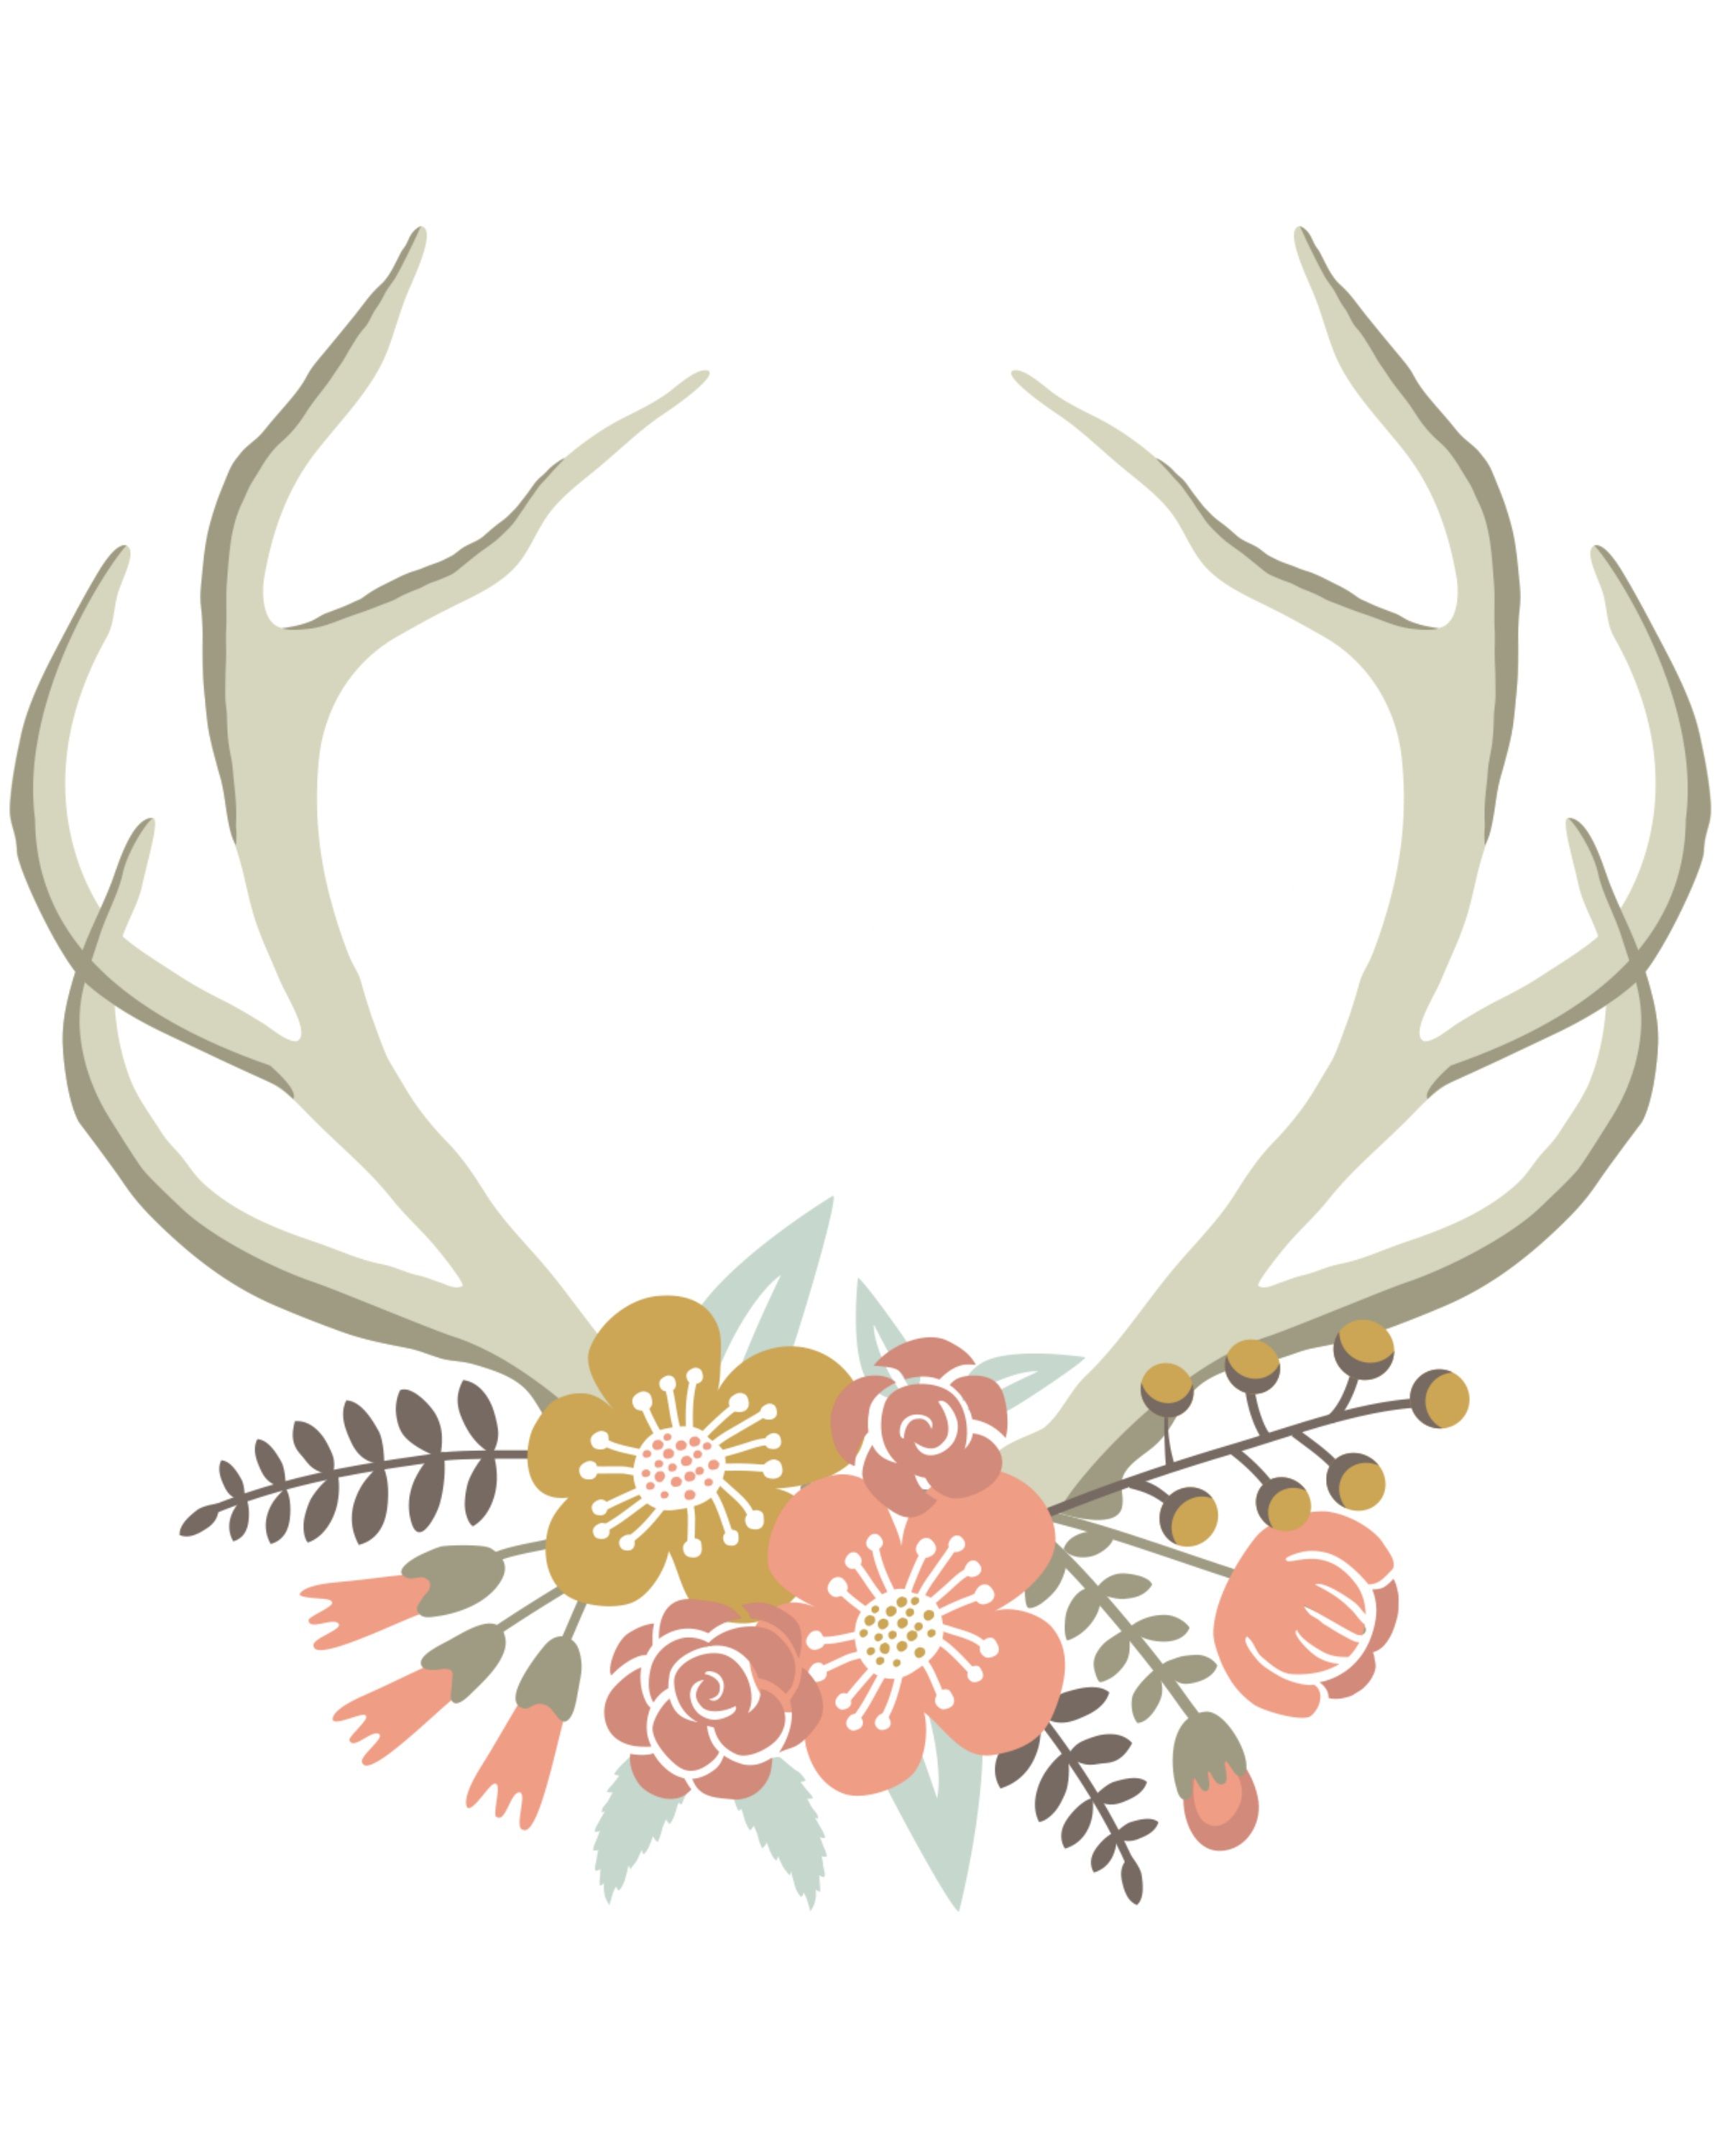 Deer Antlers With Flowers Clipart.